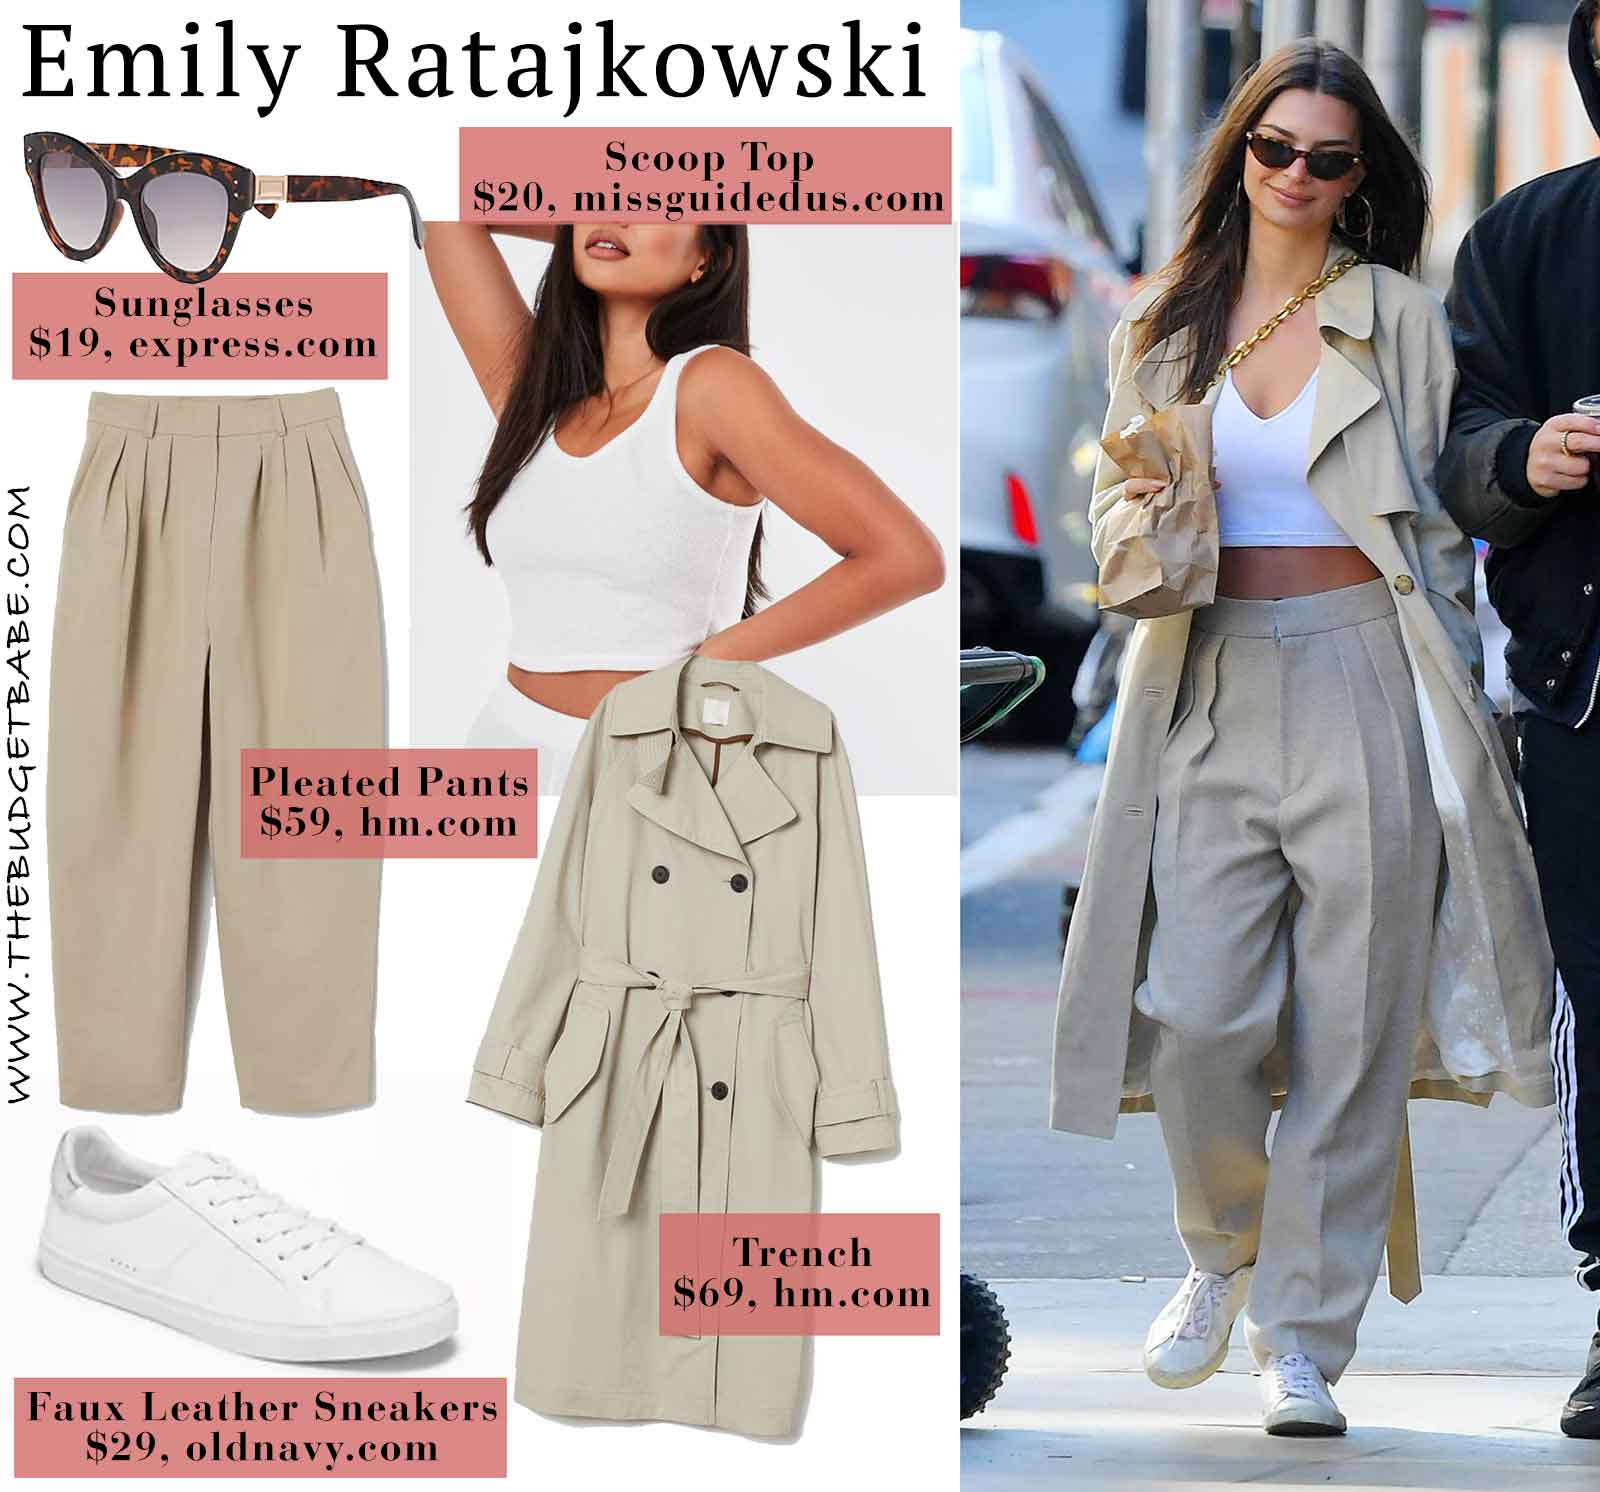 Emily Ratajkowski's pleated pants and trench coat look for less